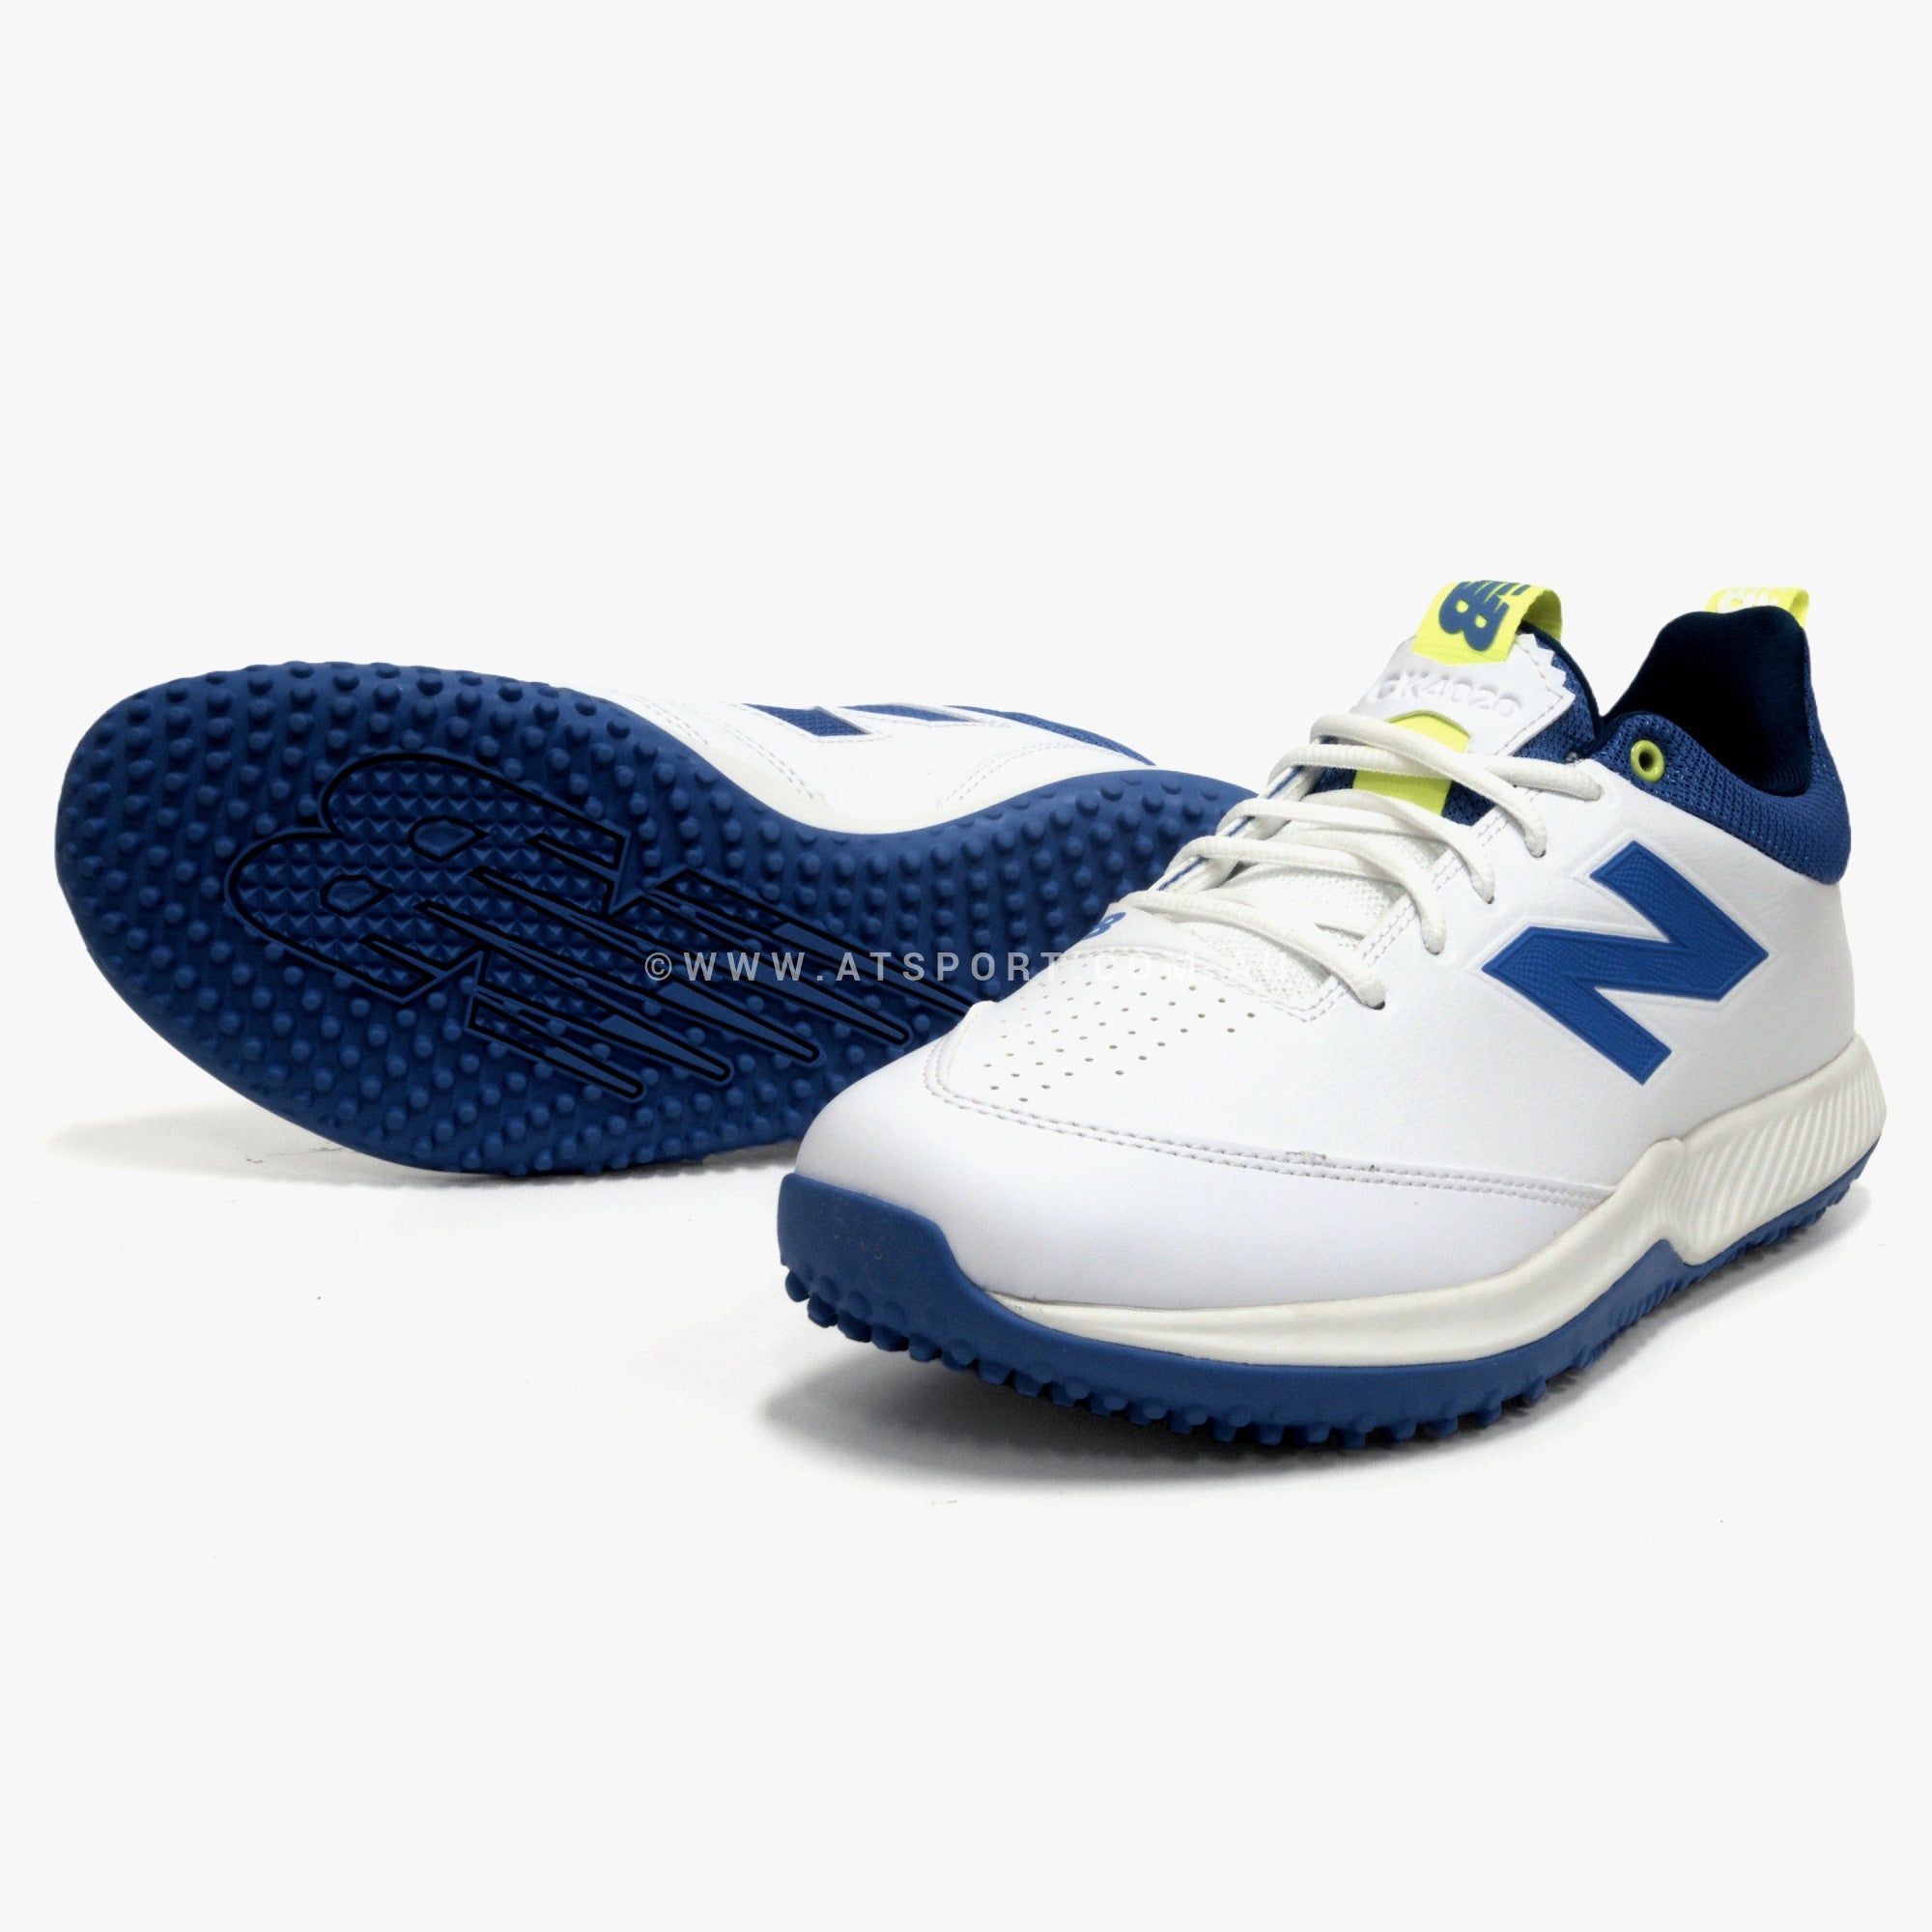 New Balance Ck4020 V5 Rubber Cricket Shoes / Rubbers